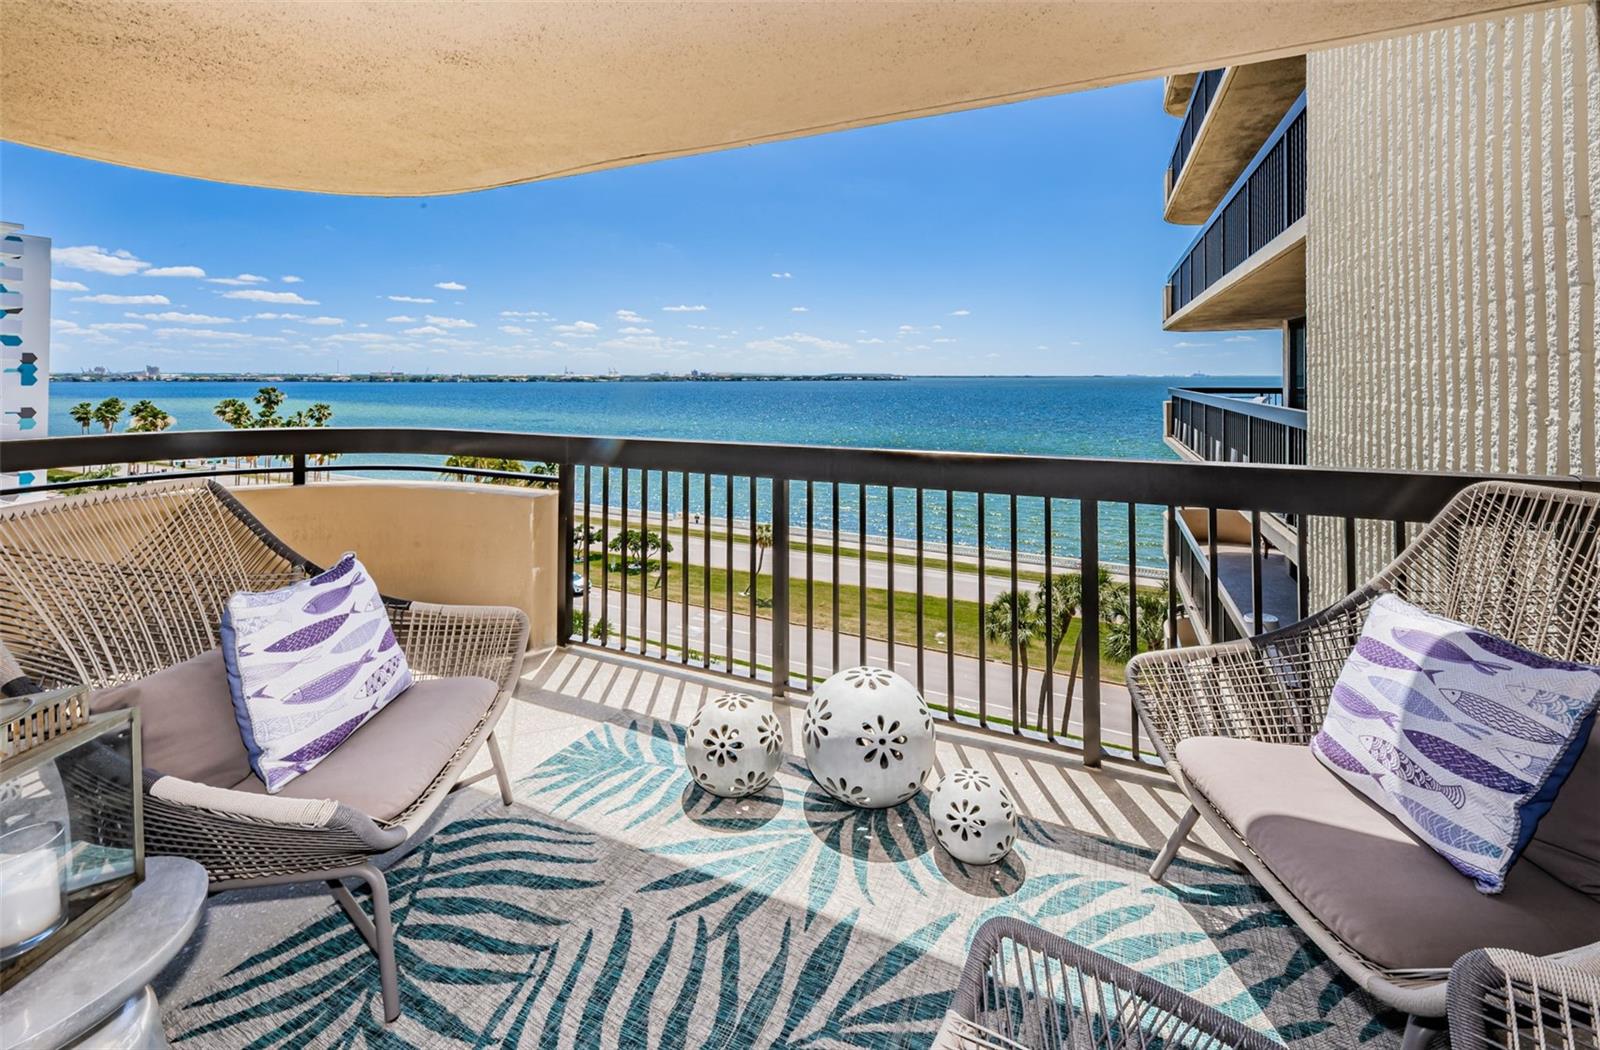 Located on the 8th Floor- enjoy the water views of Bayshore.